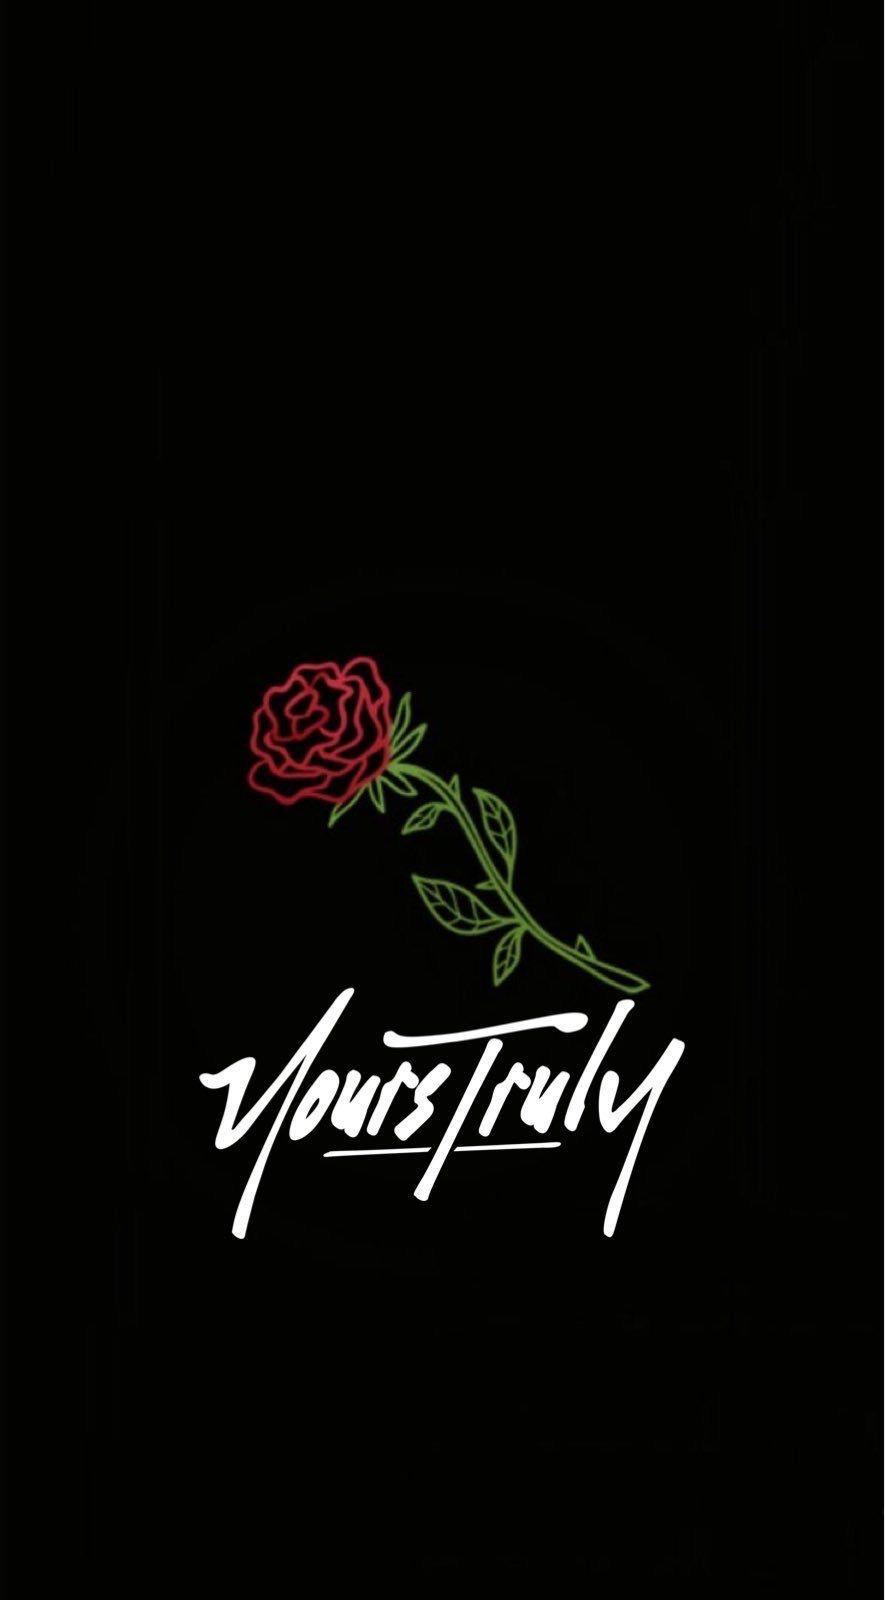 Phora yours truly mixtape download - hrseoseocw